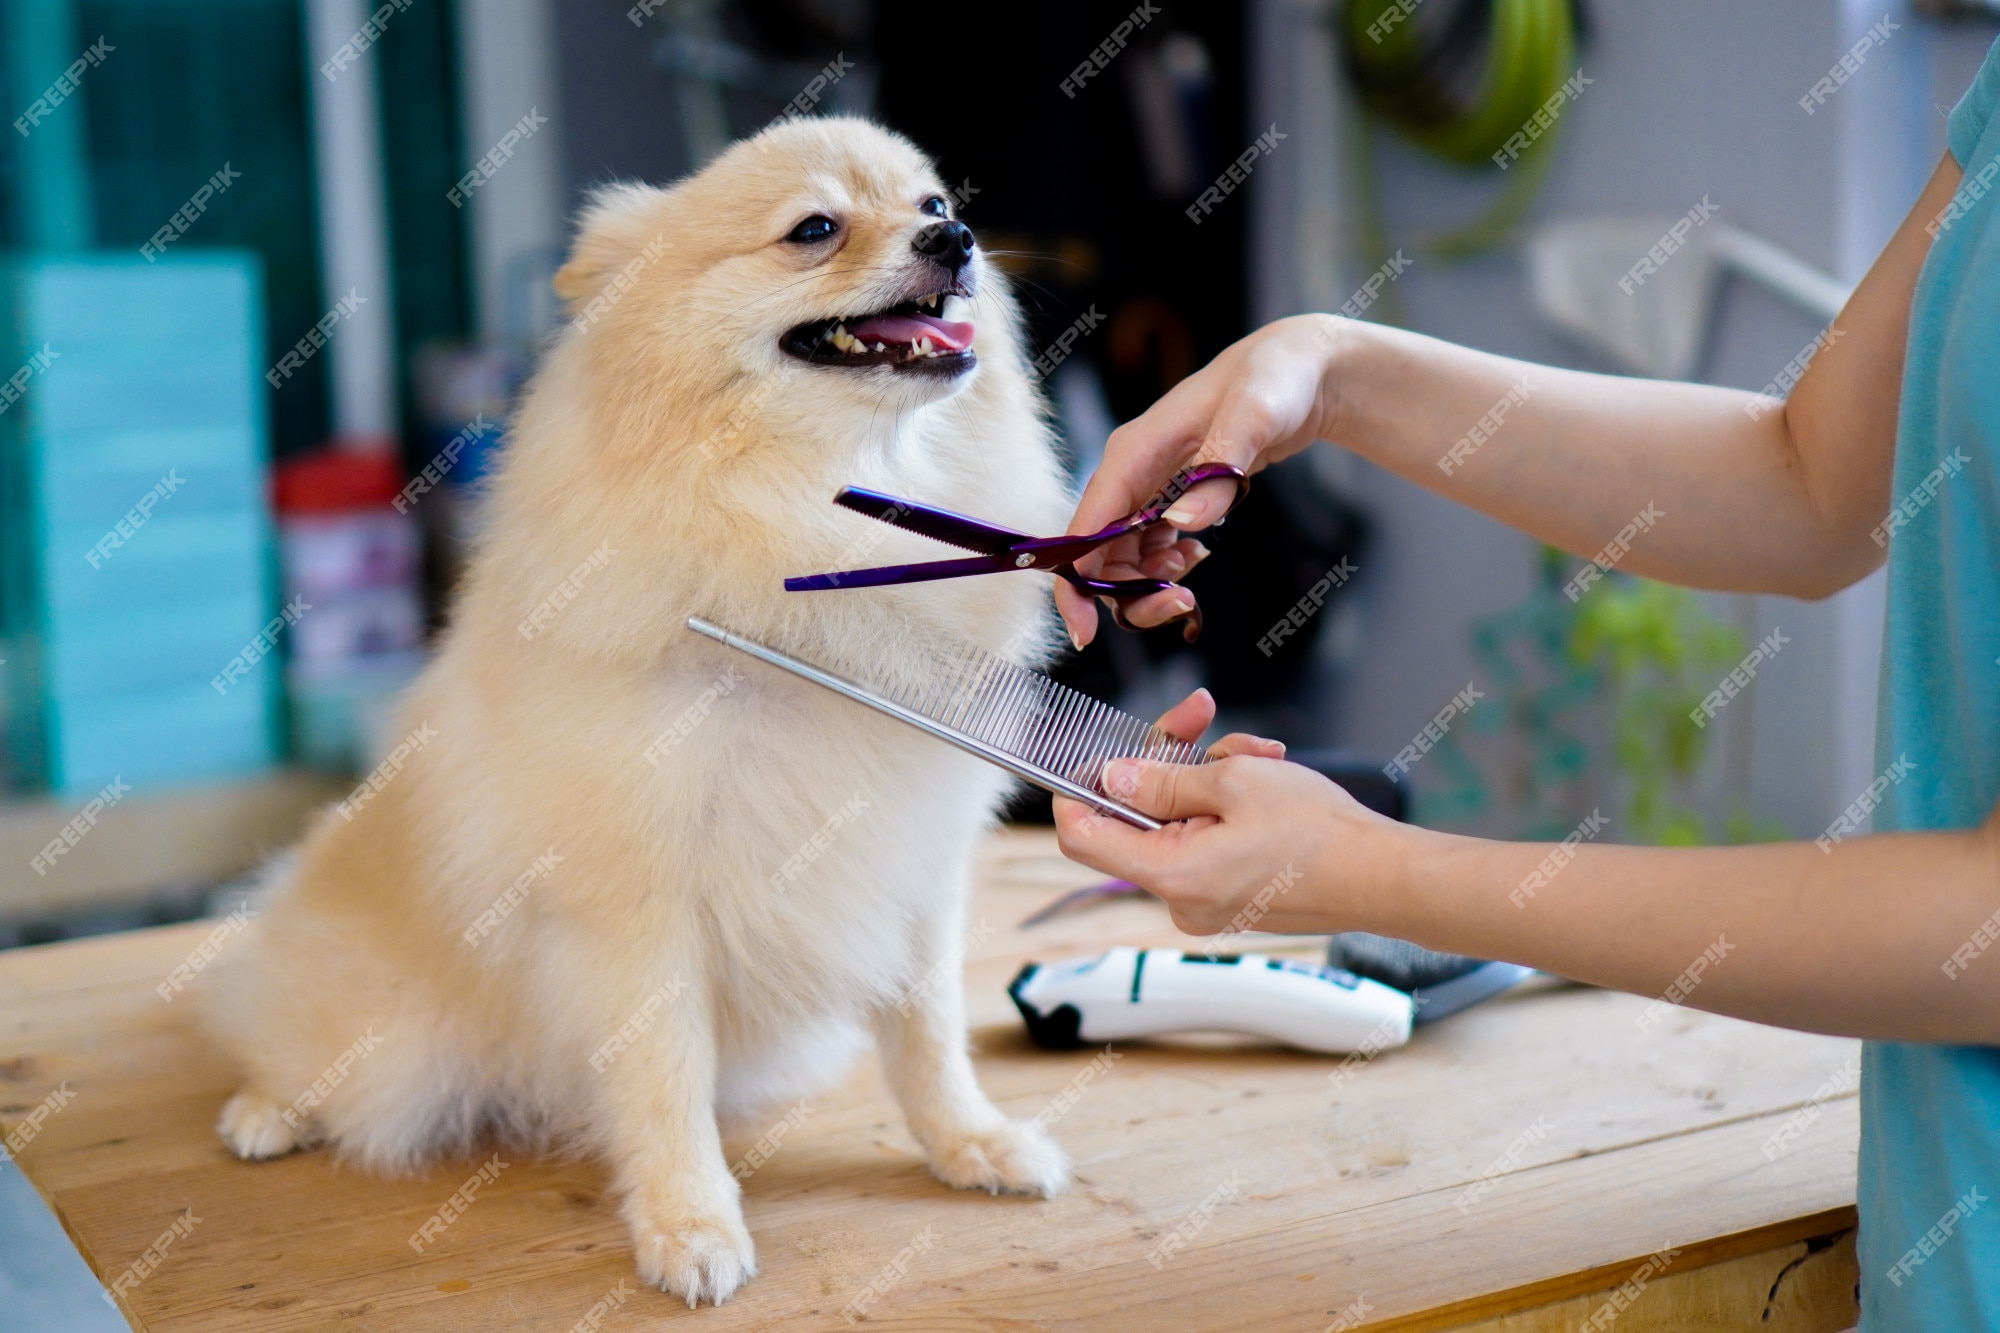 Premium Photo | Someone grooming or cut a dog hair a pomeranian or small dog  breed with a scissors